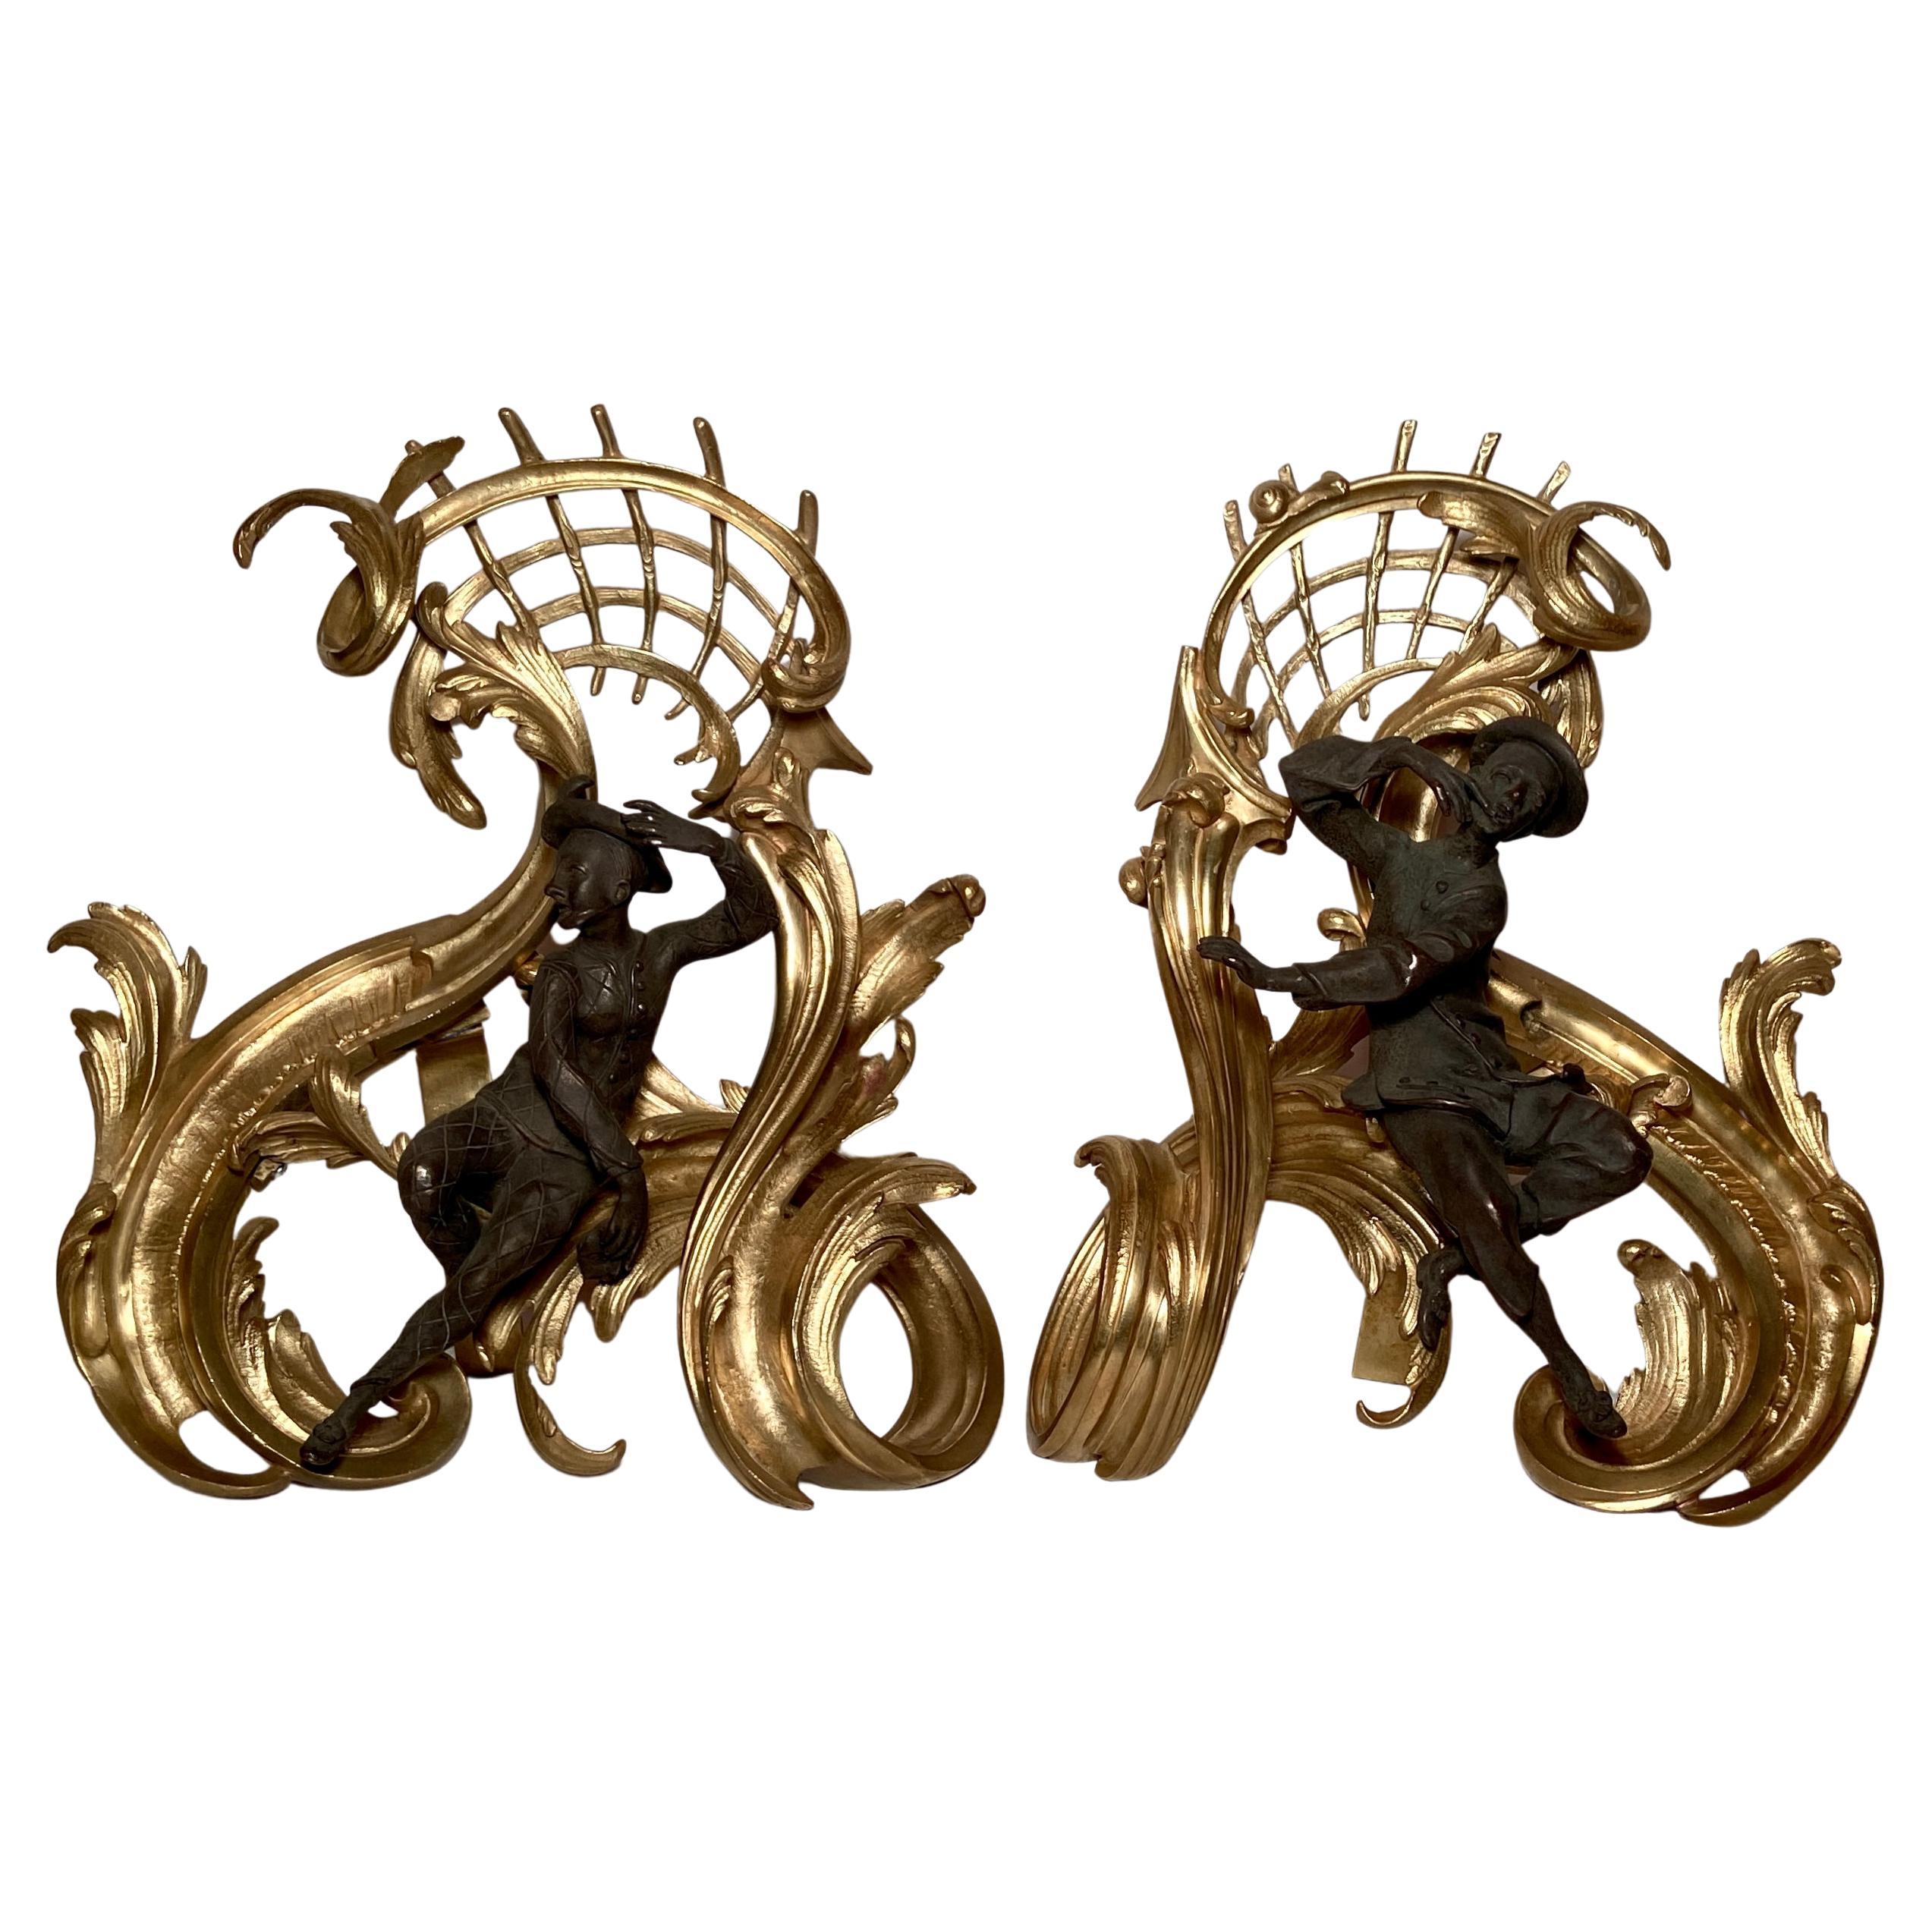 Pair Antique French Ormolu "Chenets" with Patinated Bronze Figures, Circa 1860